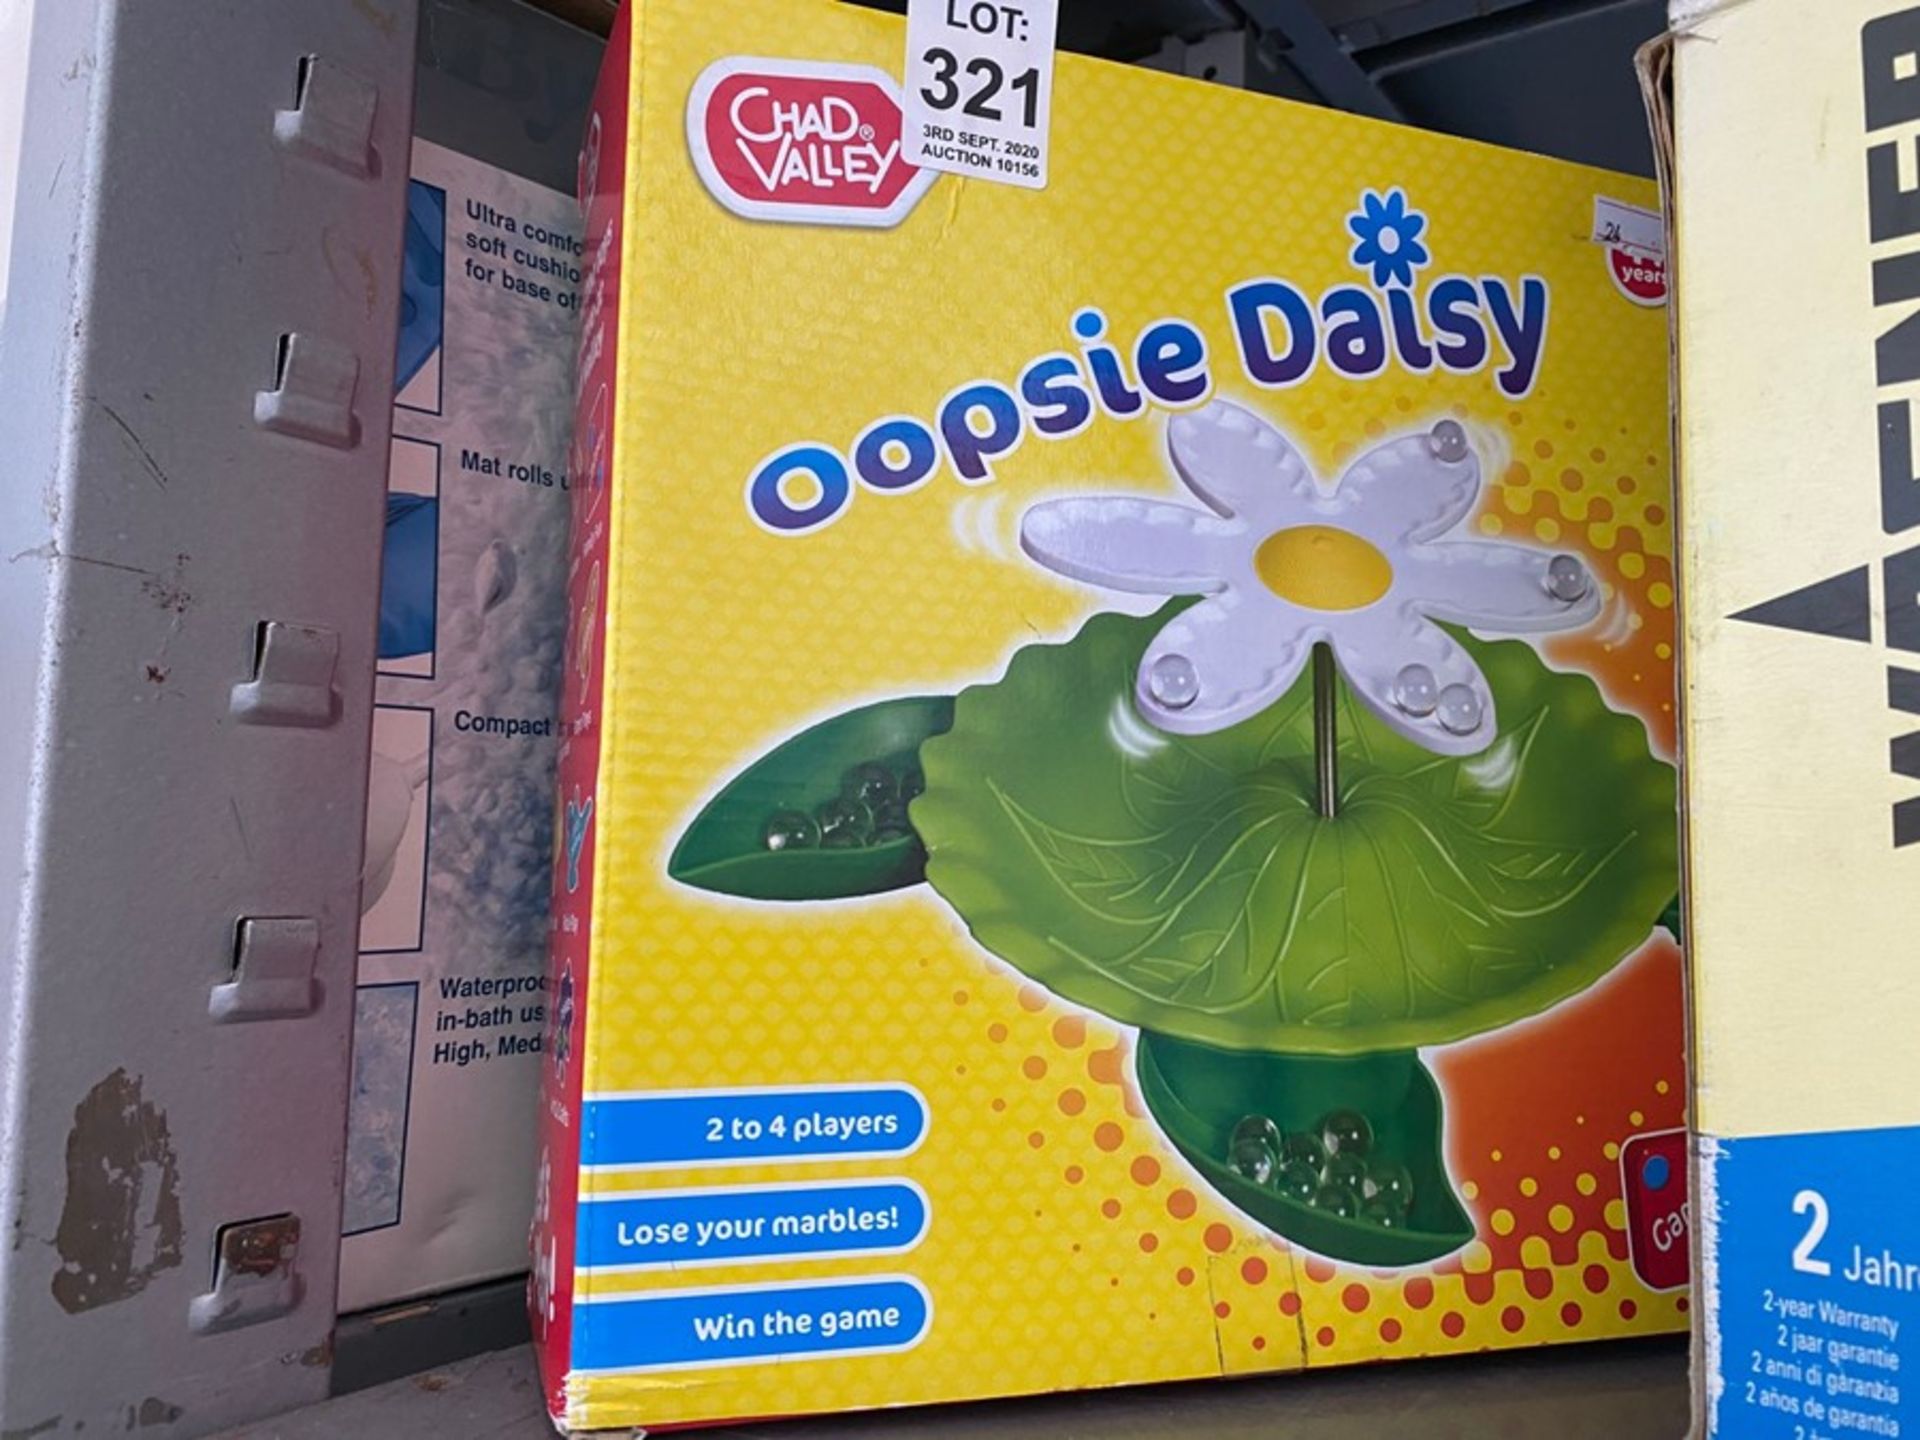 CHAD VALLEY OOPSIE DAISY GAME